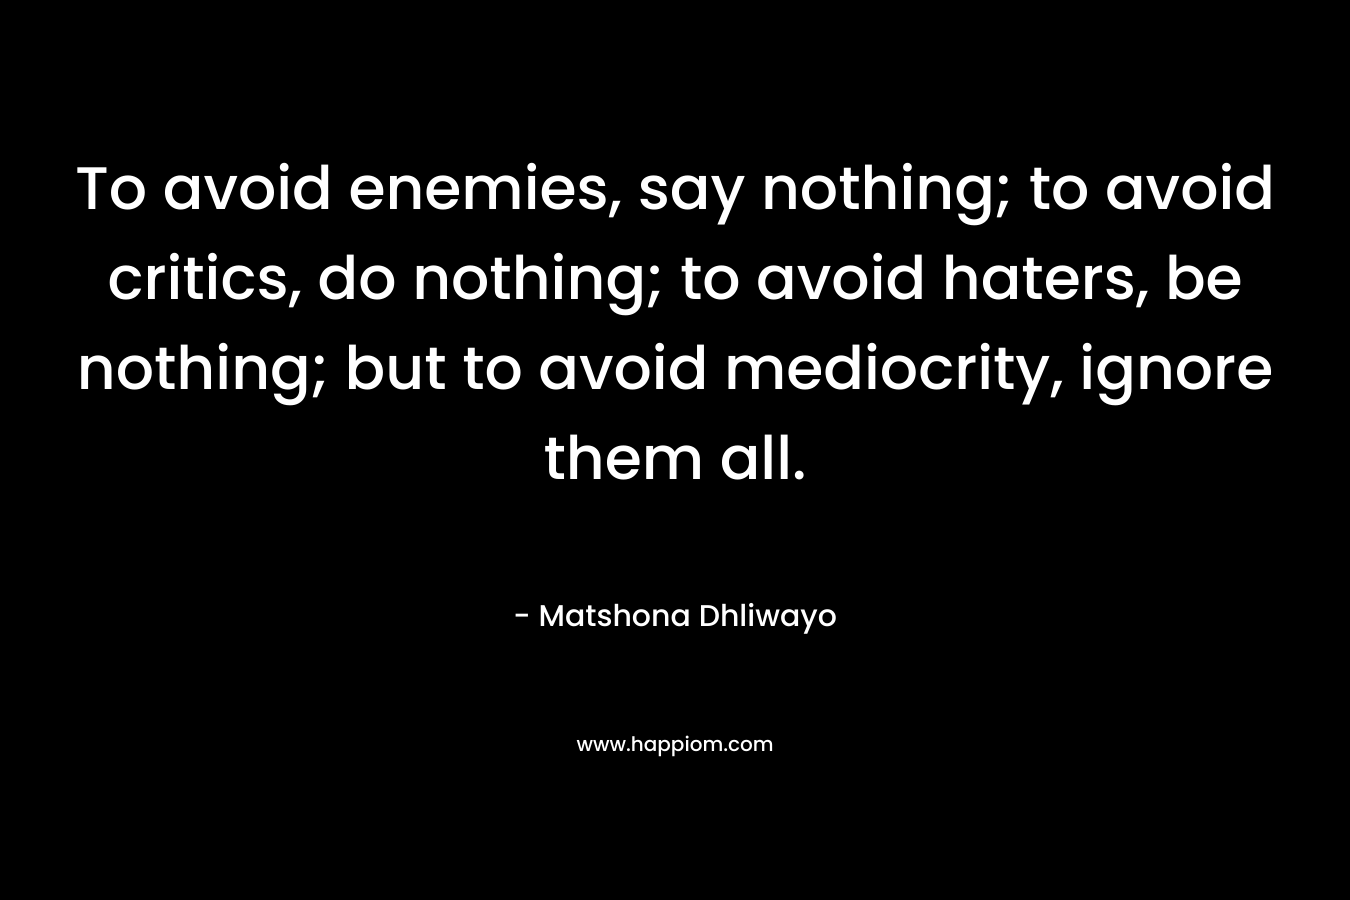 To avoid enemies, say nothing; to avoid critics, do nothing; to avoid haters, be nothing; but to avoid mediocrity, ignore them all.